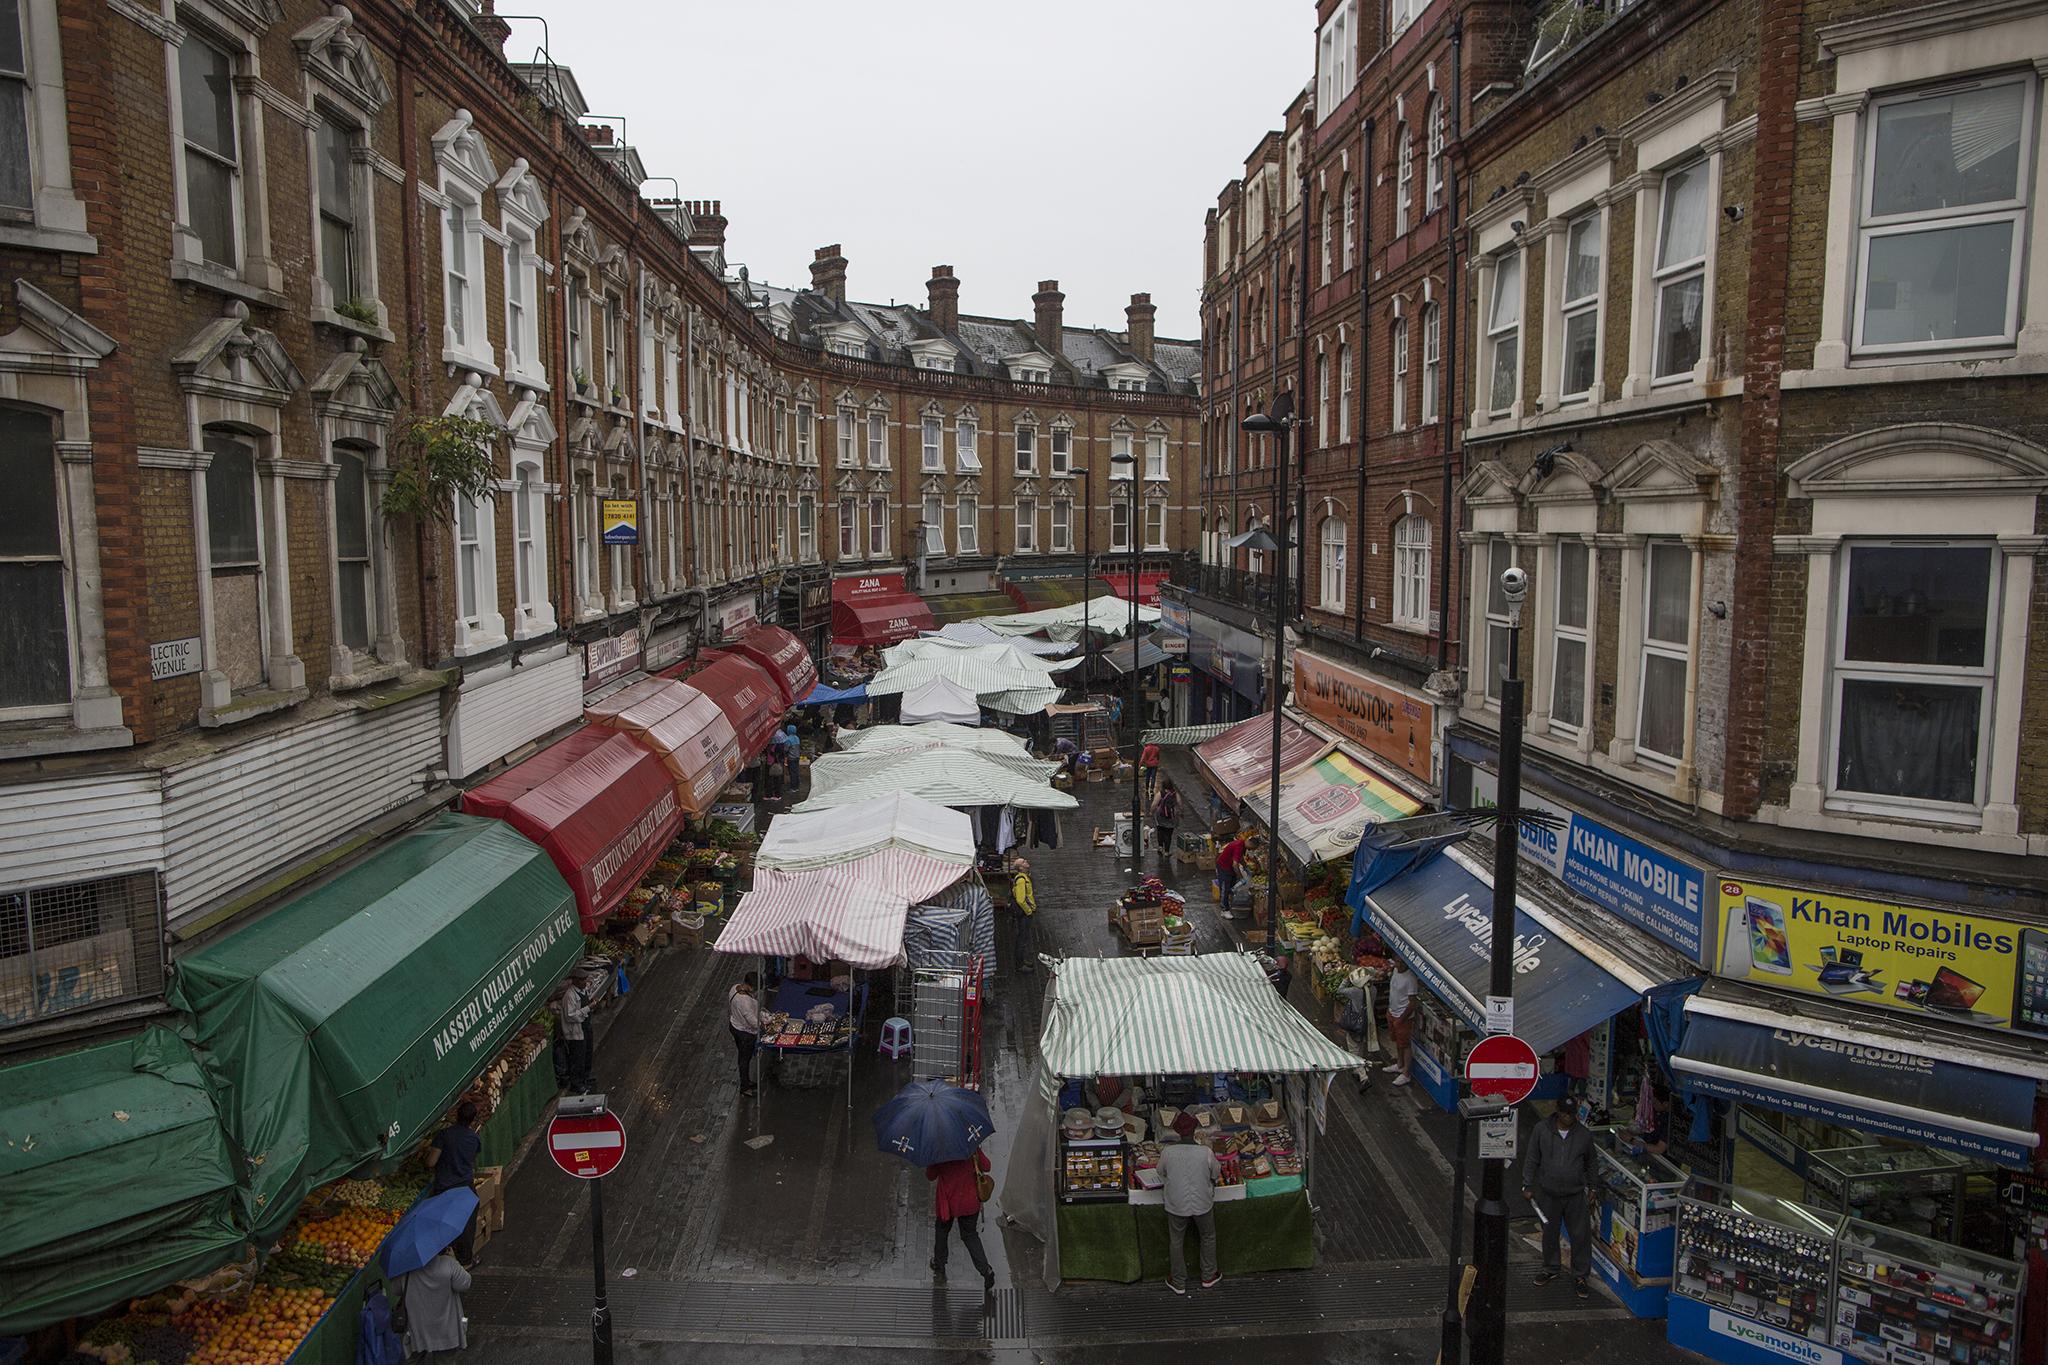 Locals are wary of the changes new money has brought to Brixton